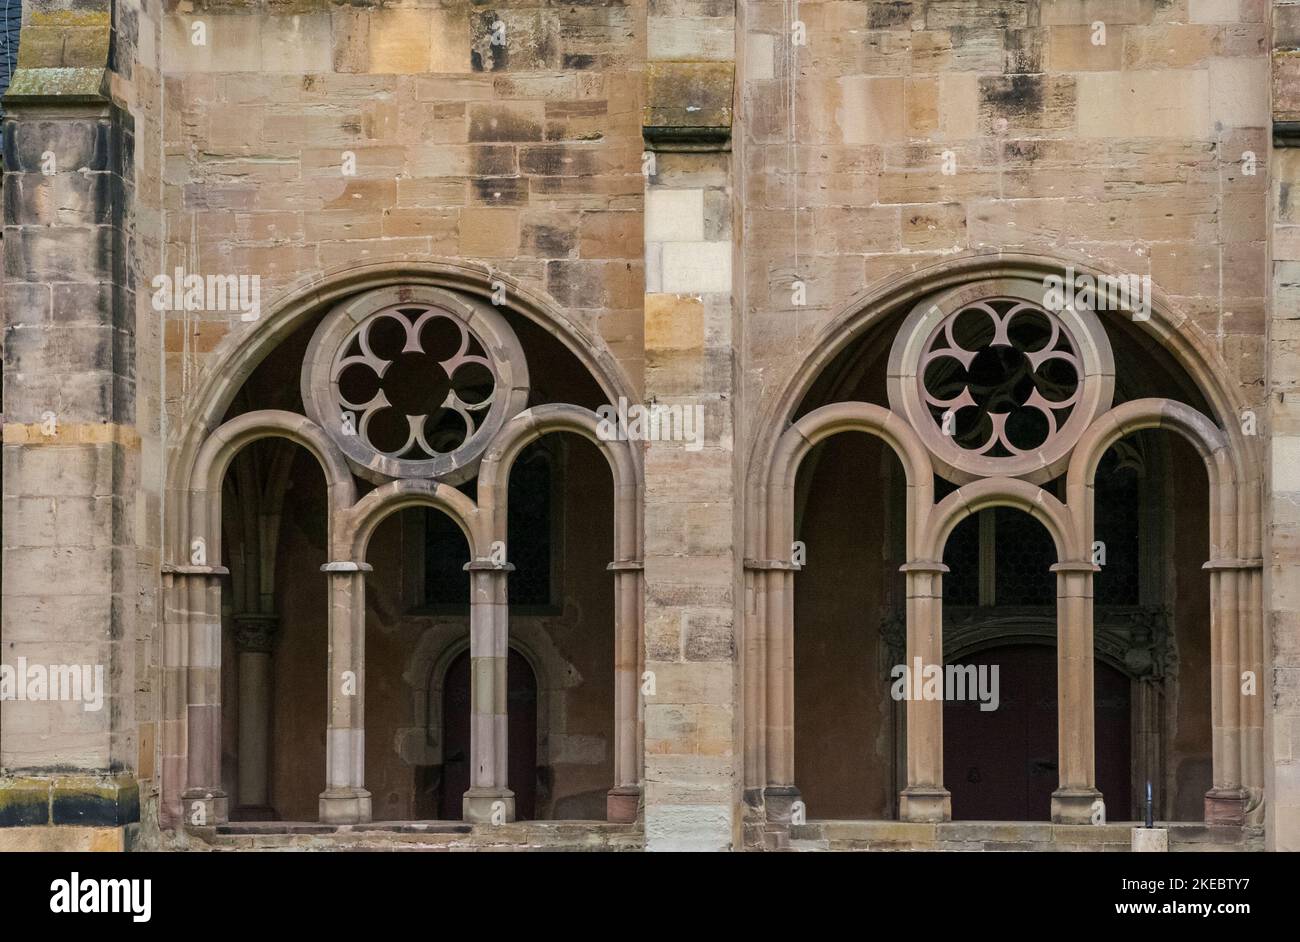 Close-up view of two traced windows of the Gothic cloister corridor built between 1245 and 1270, connecting the famous Trier Cathedral to the... Stock Photo